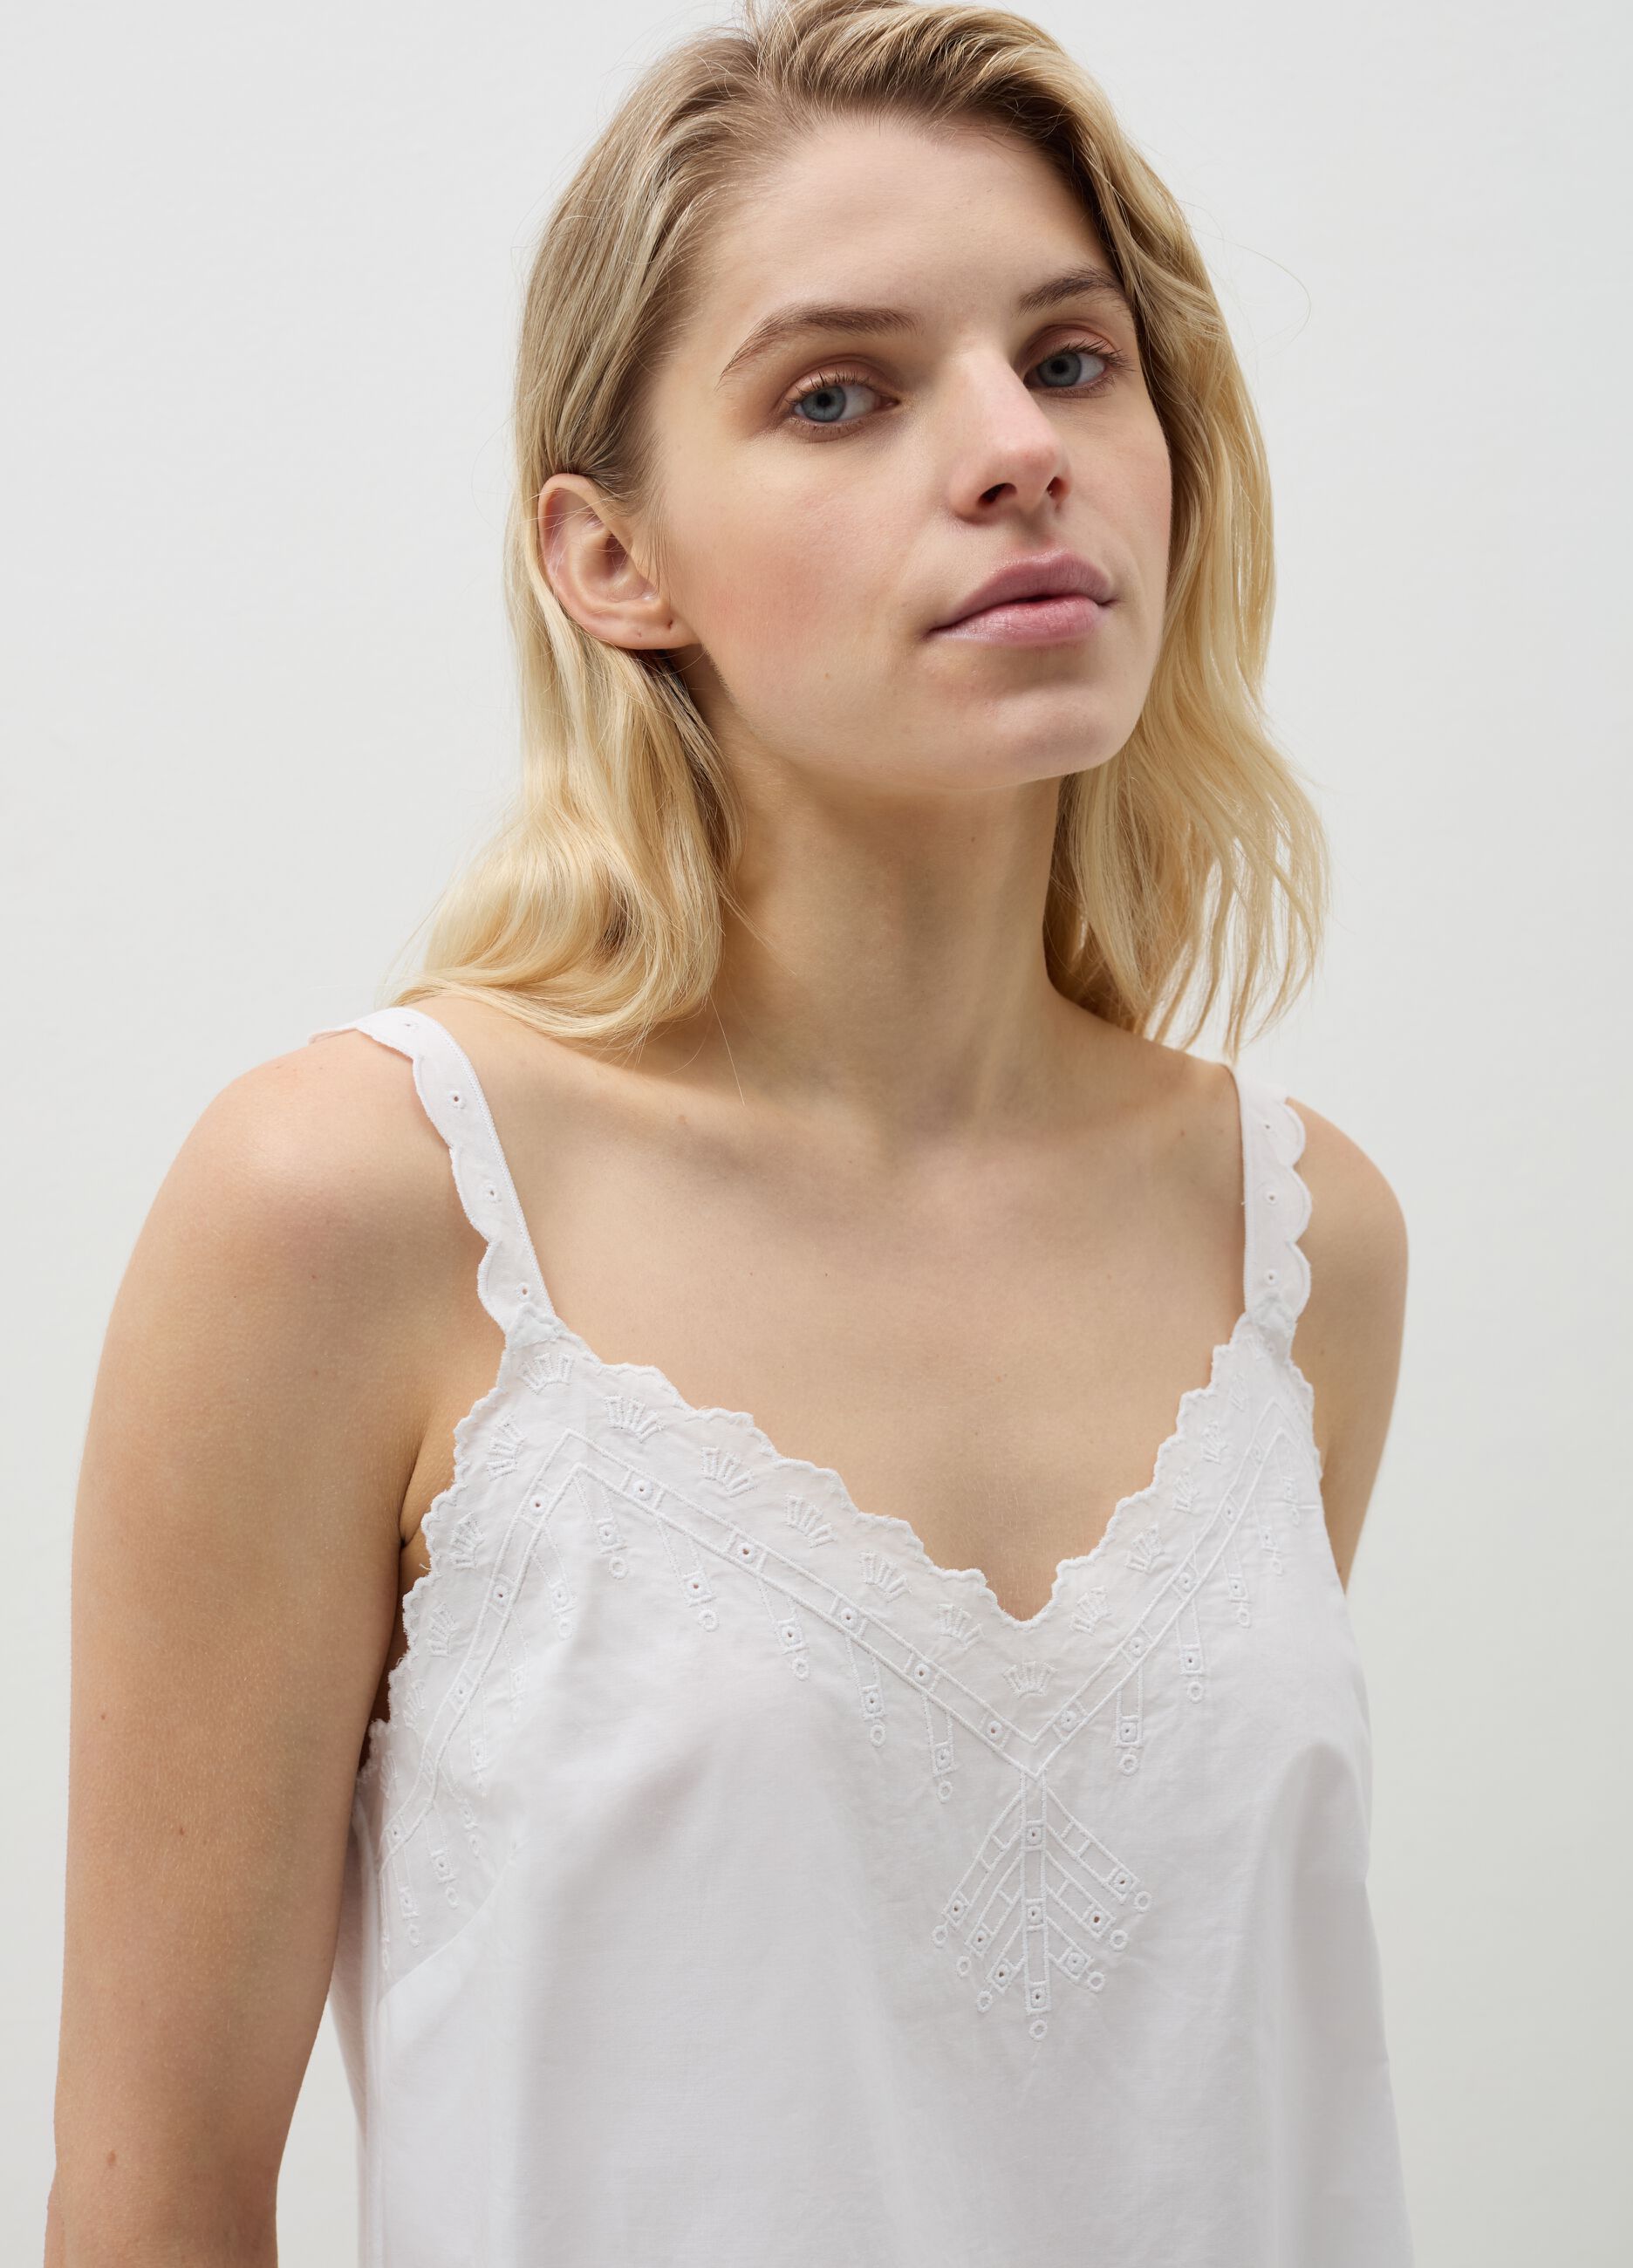 Pyjama top with embroidery